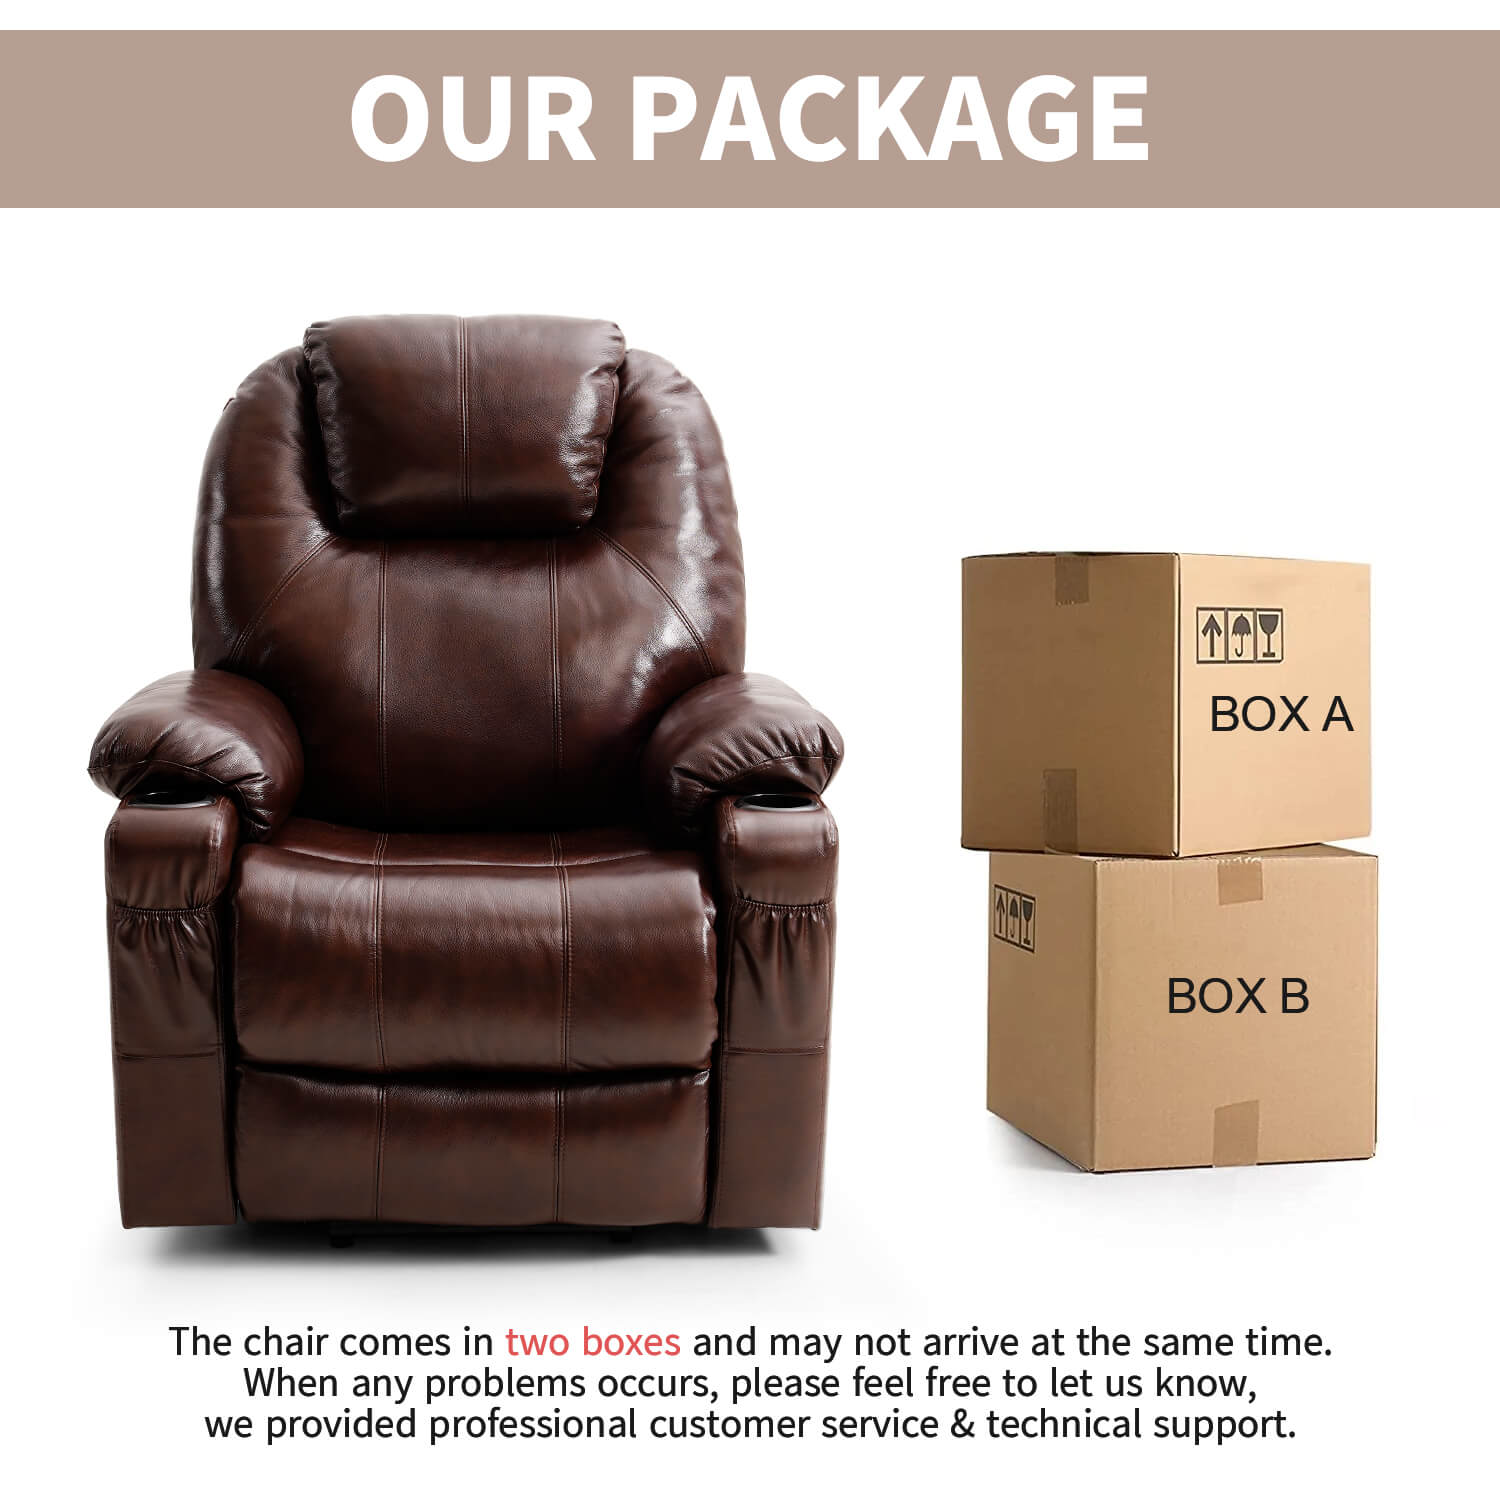 Soulout Power Lift Recliner Chair shipping with two boxes